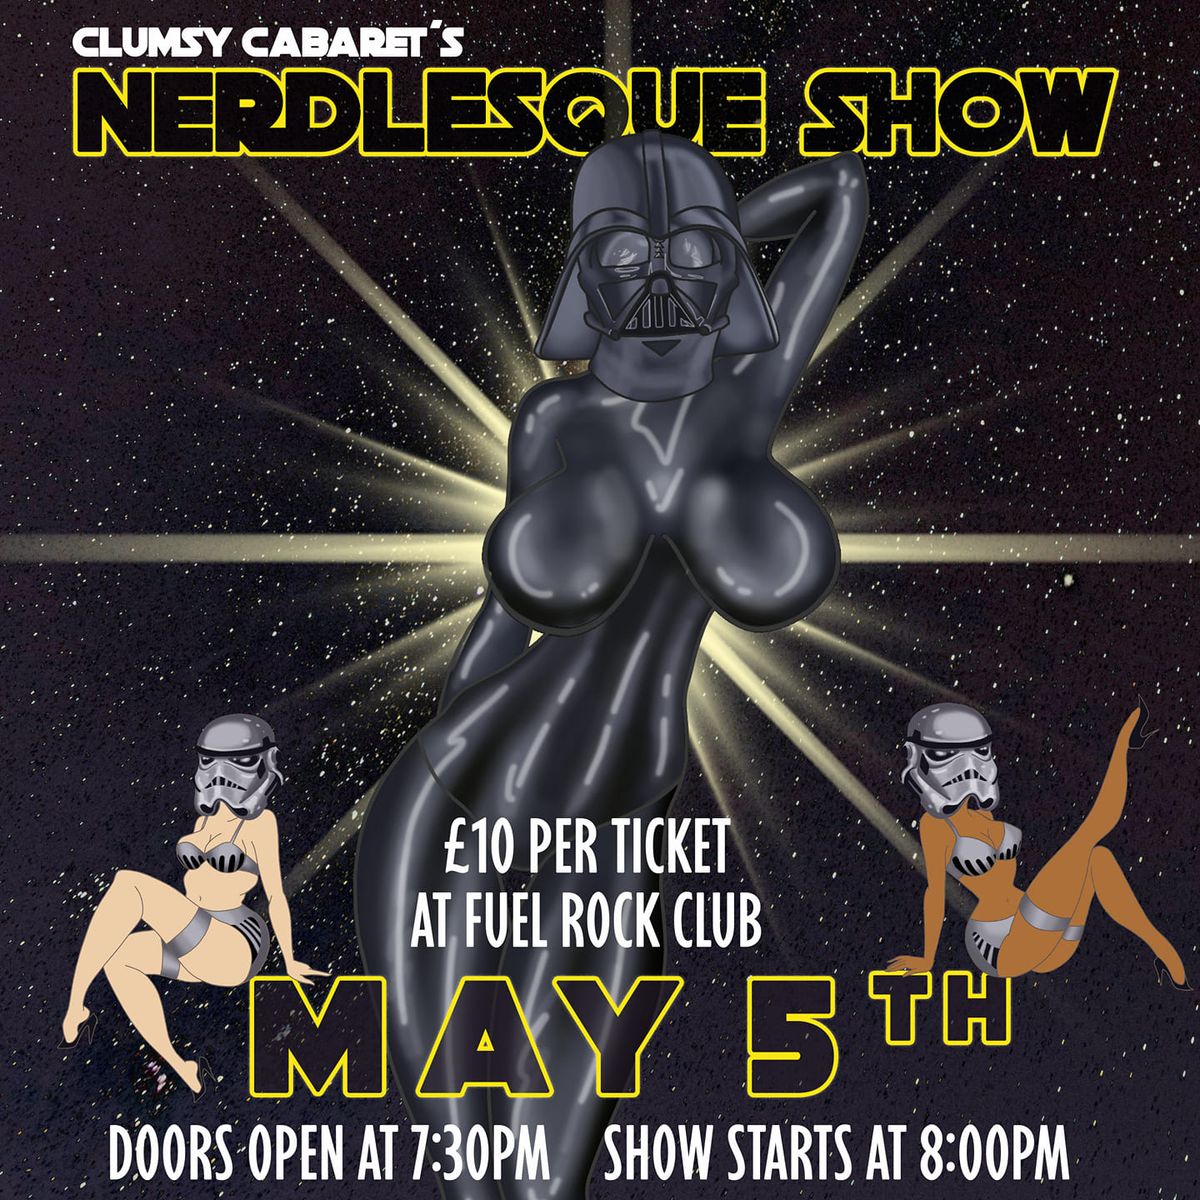 A Night of Nerdlesque by Clumsy Cabaret